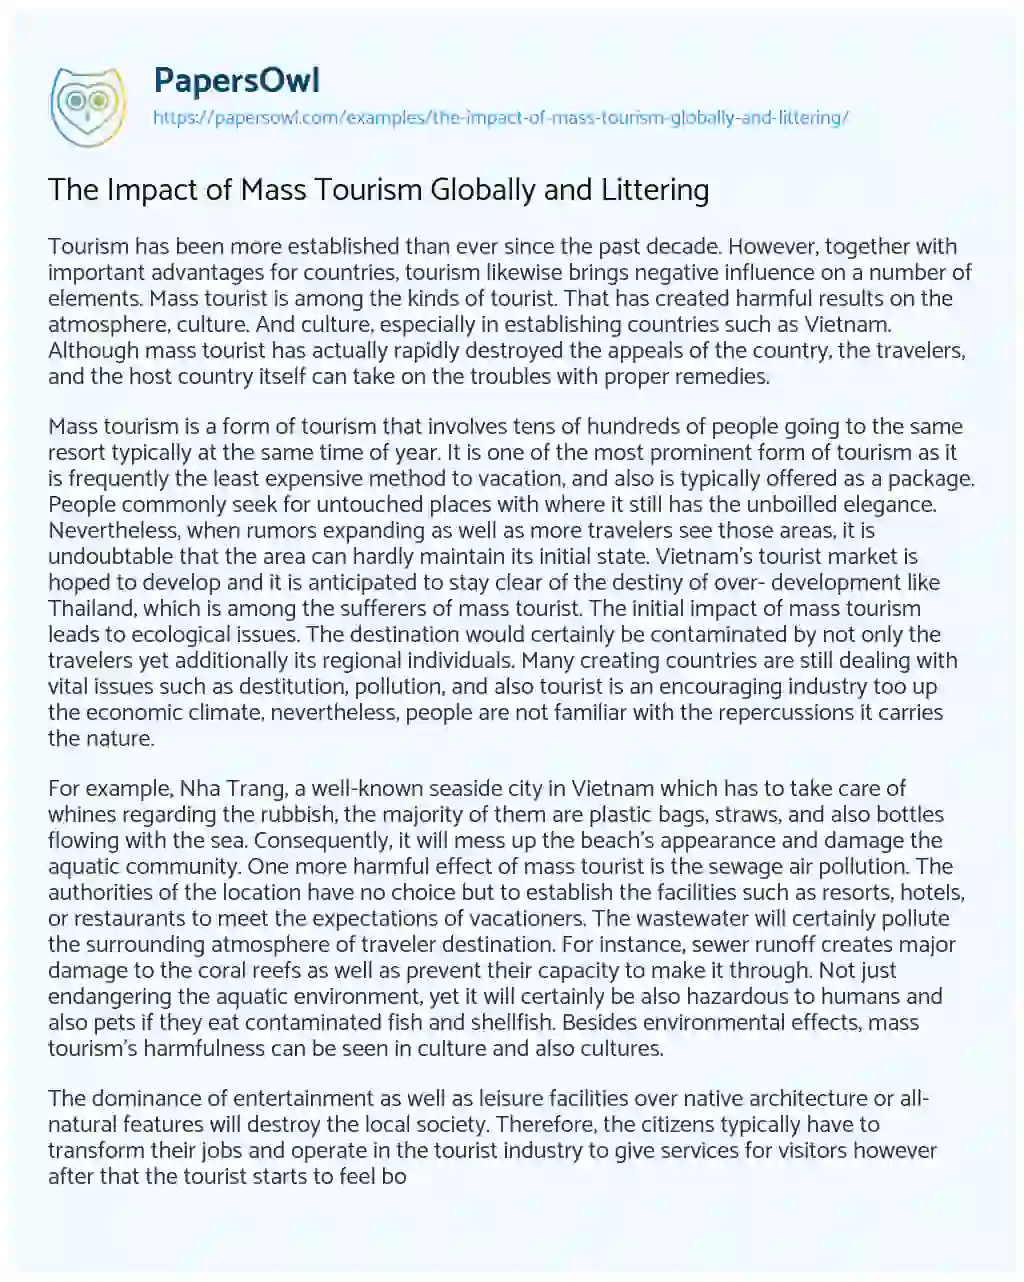 Essay on The Impact of Mass Tourism Globally and Littering